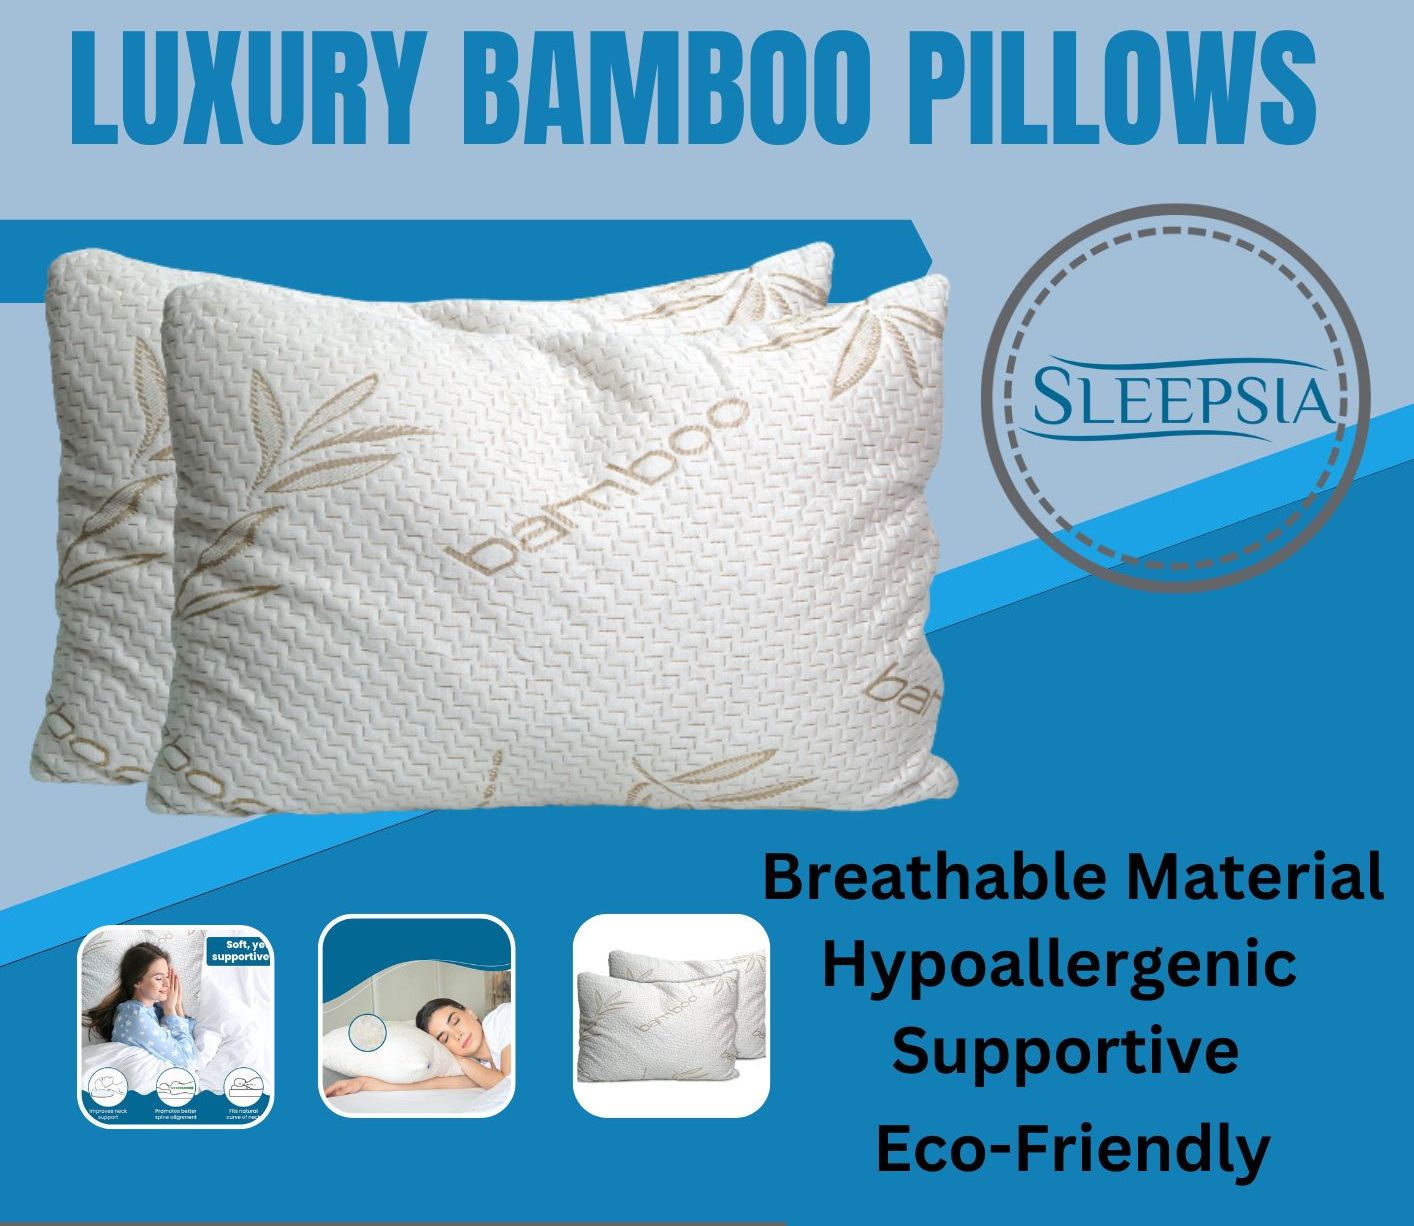 Luxury Bamboo Pillows: Why Do Experts Say Use It?